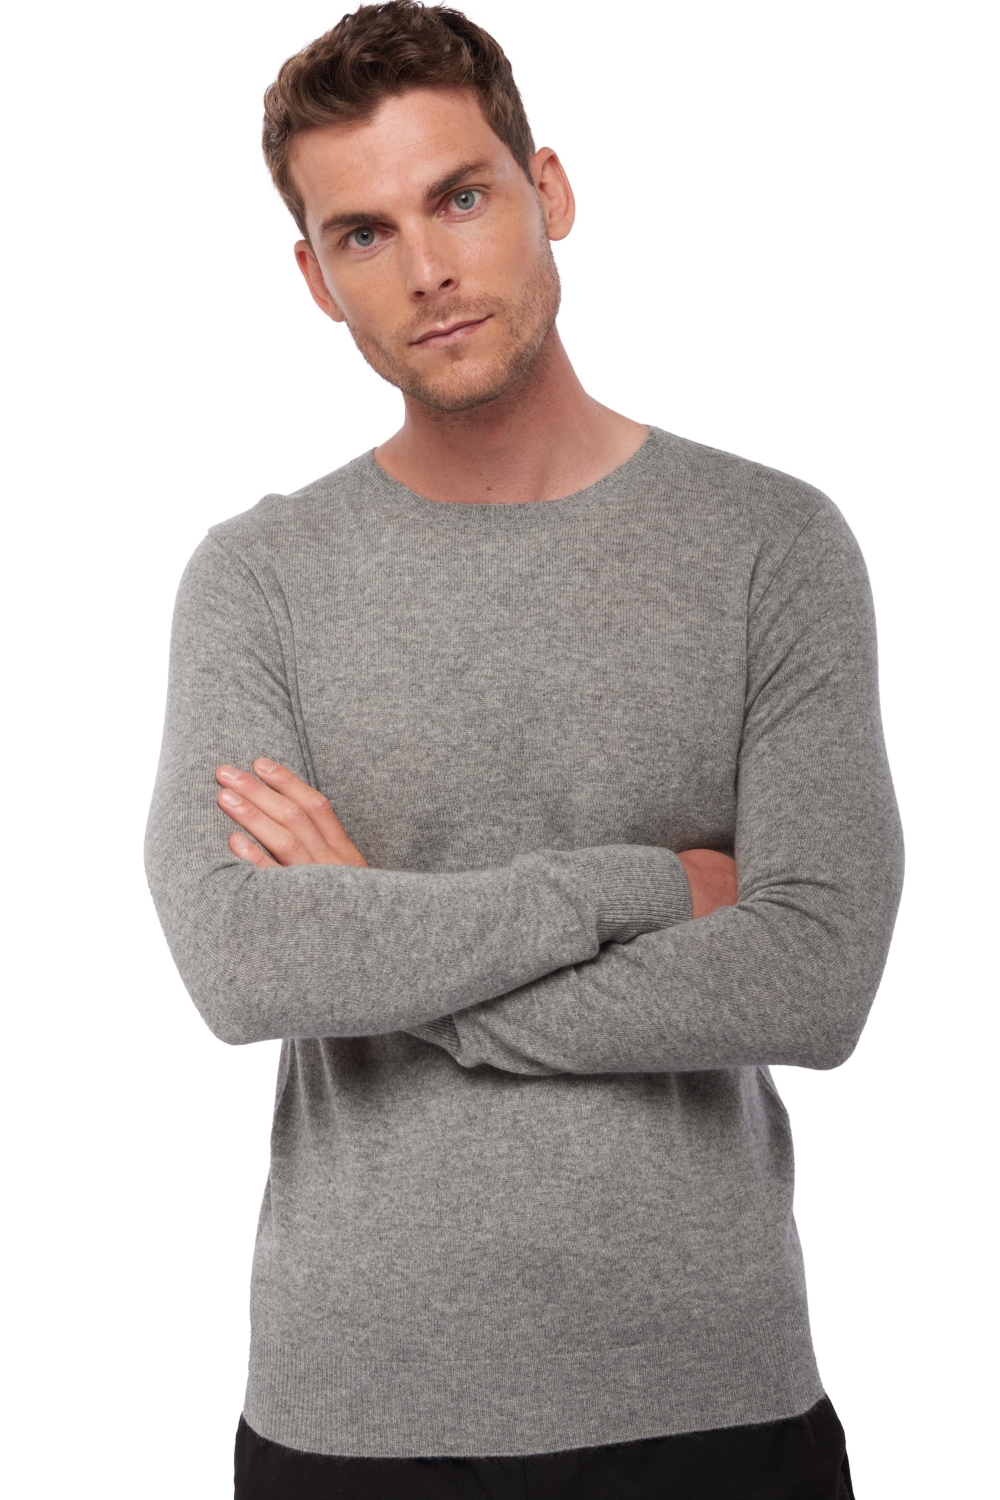 Cashmere men basic sweaters at low prices tao first light grey l